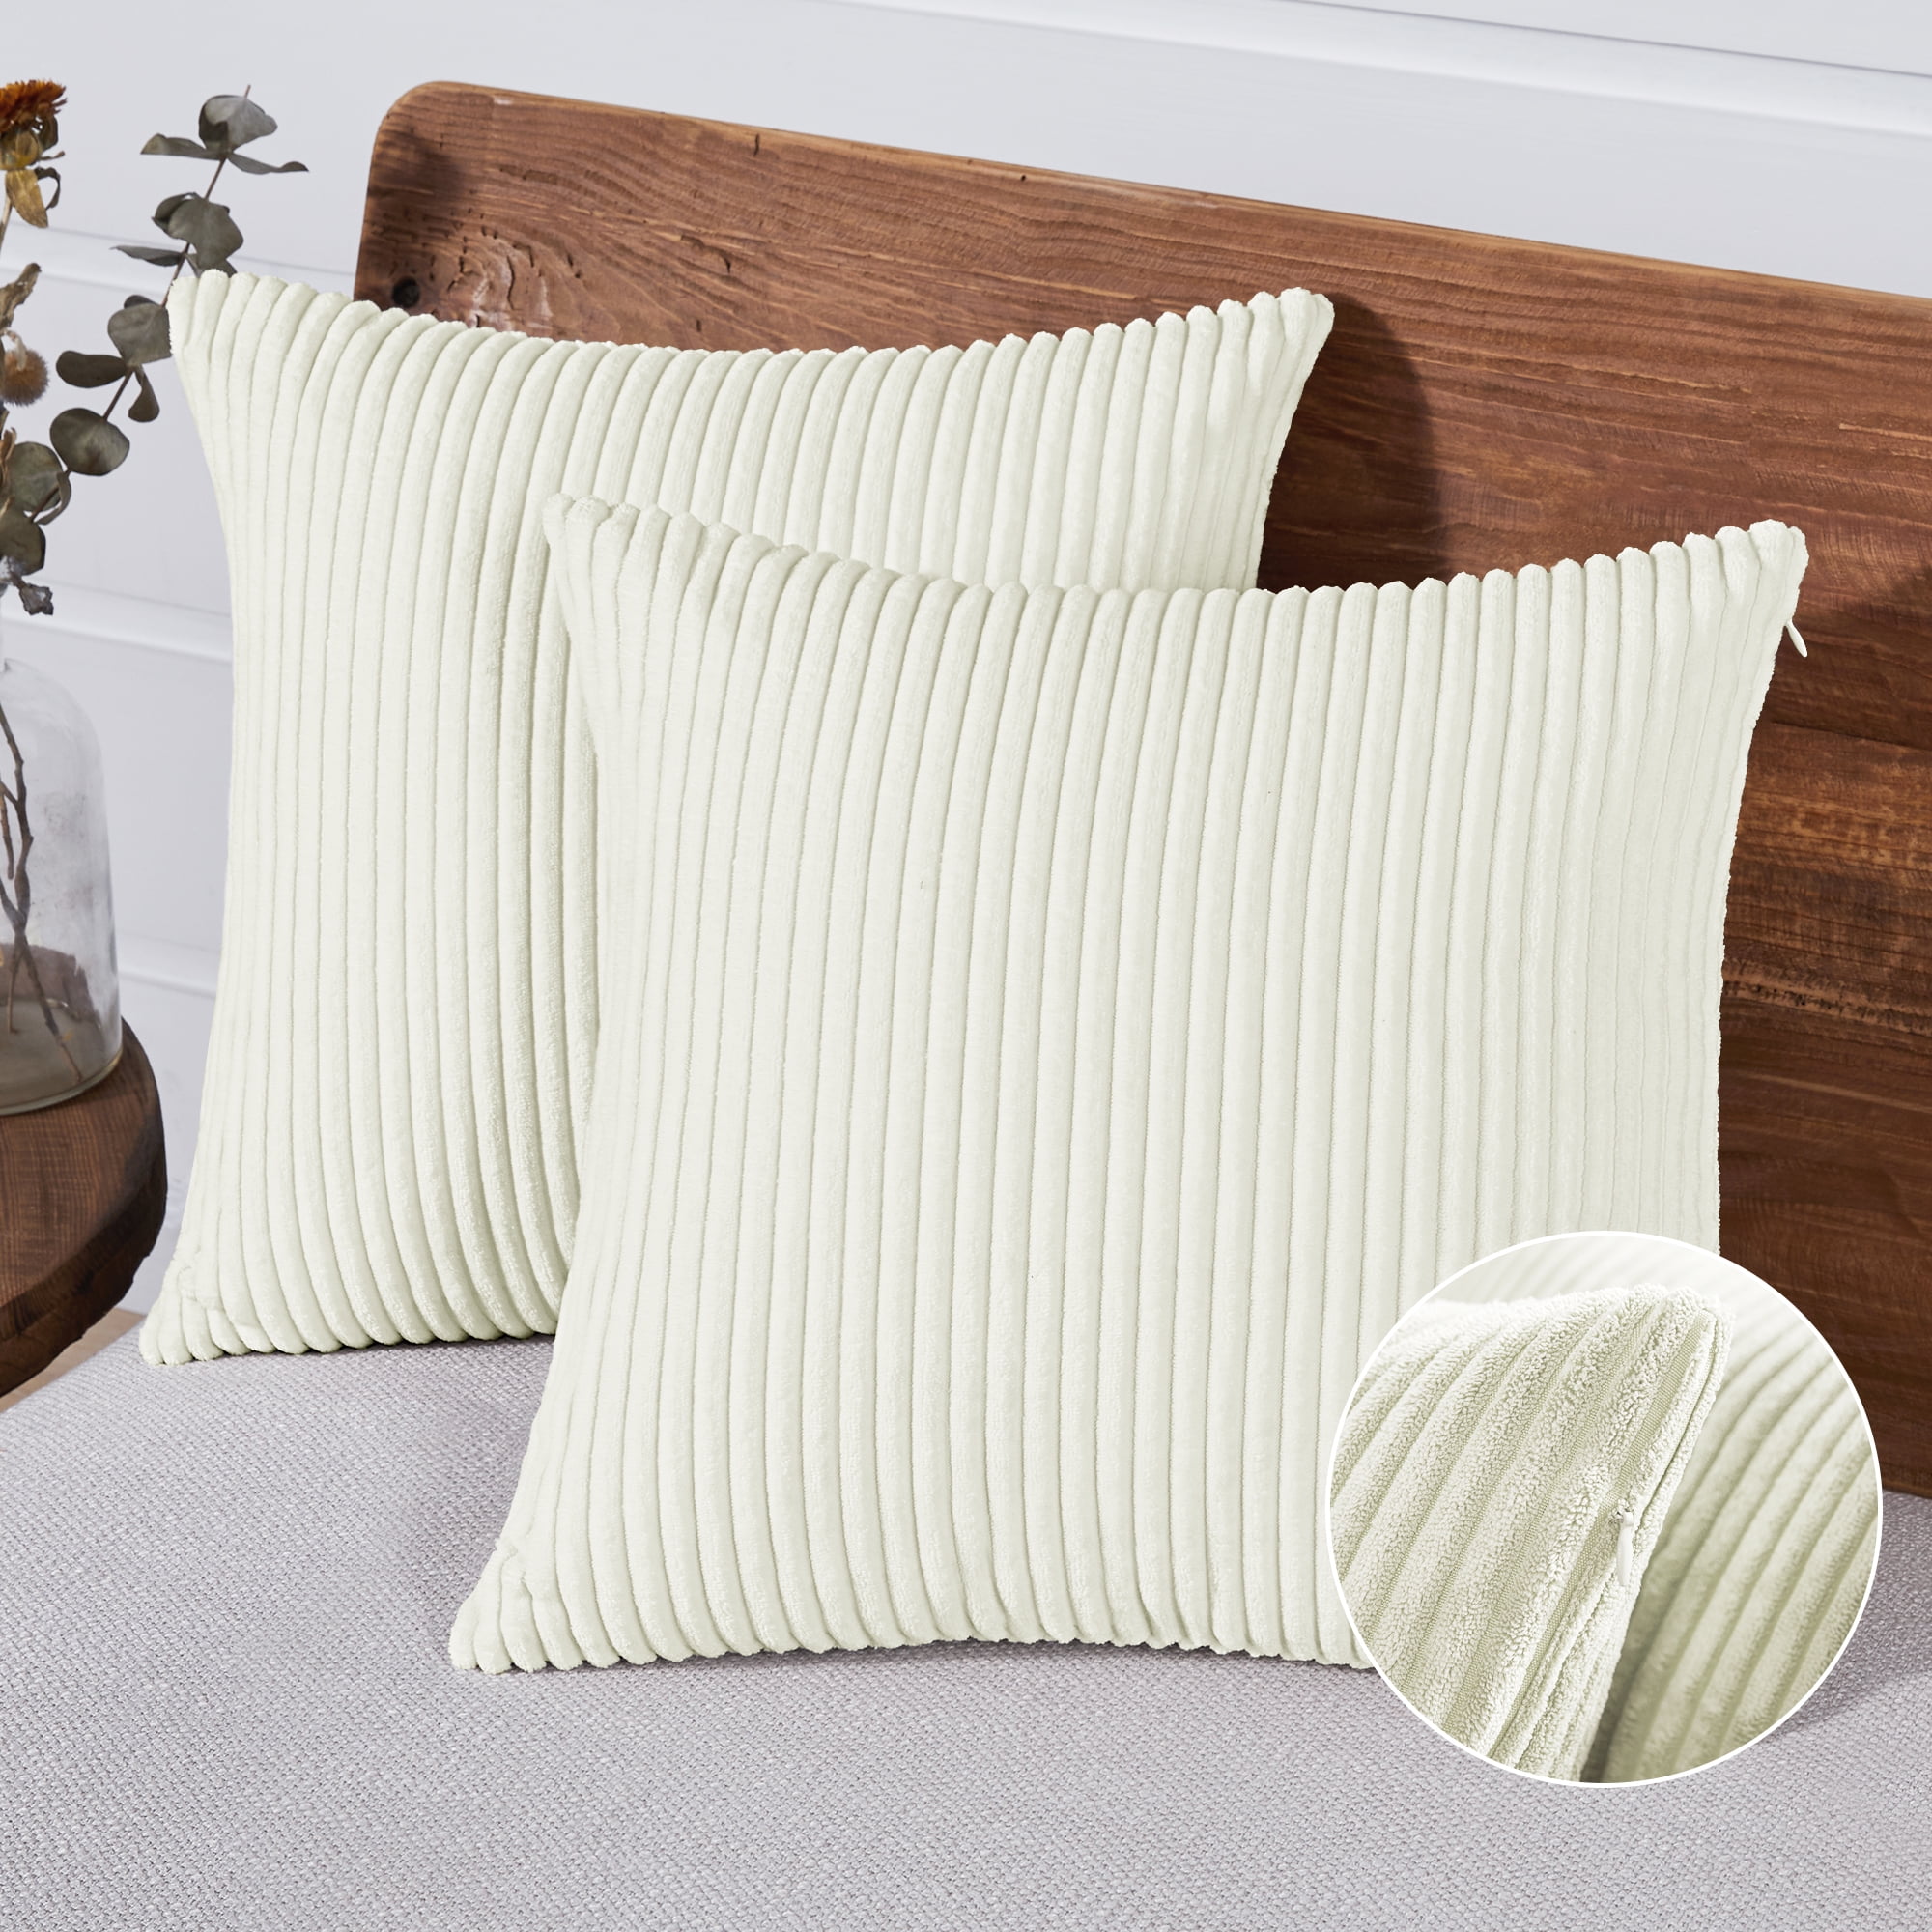 18 x 18 Inch Light Beige Deconovo Decorative Throw Pillow Covers Plush Corduroy Velvet Striped Couch Zippered Pillowcases for Chair Bed Home 